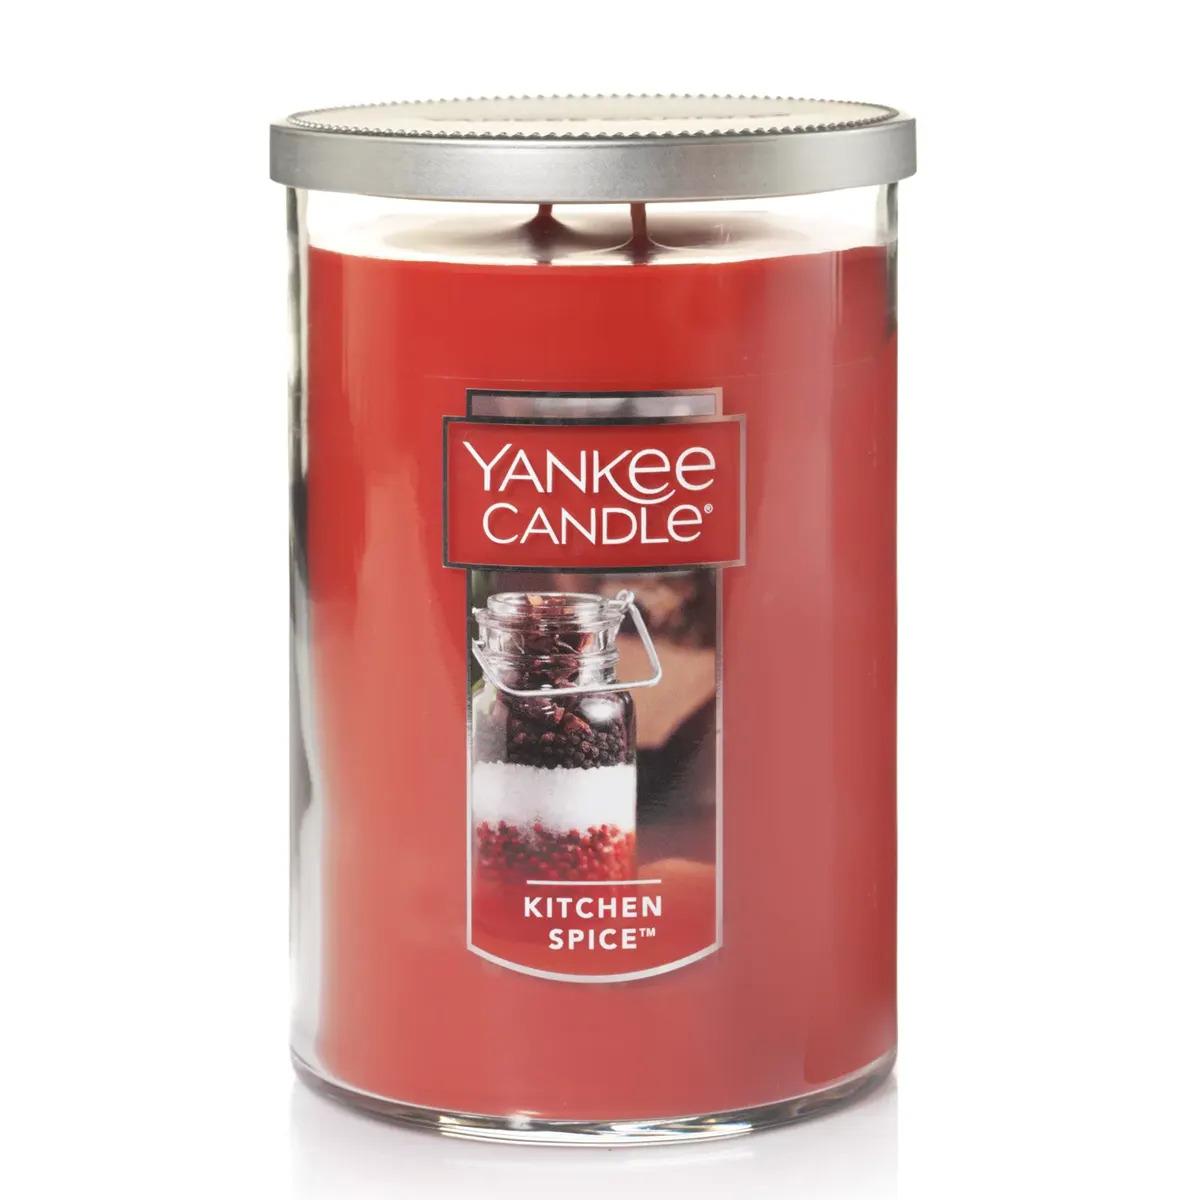 Yankee Candle Kitchen Spice Large 2 Wick Tumbler Fall Candle for $10